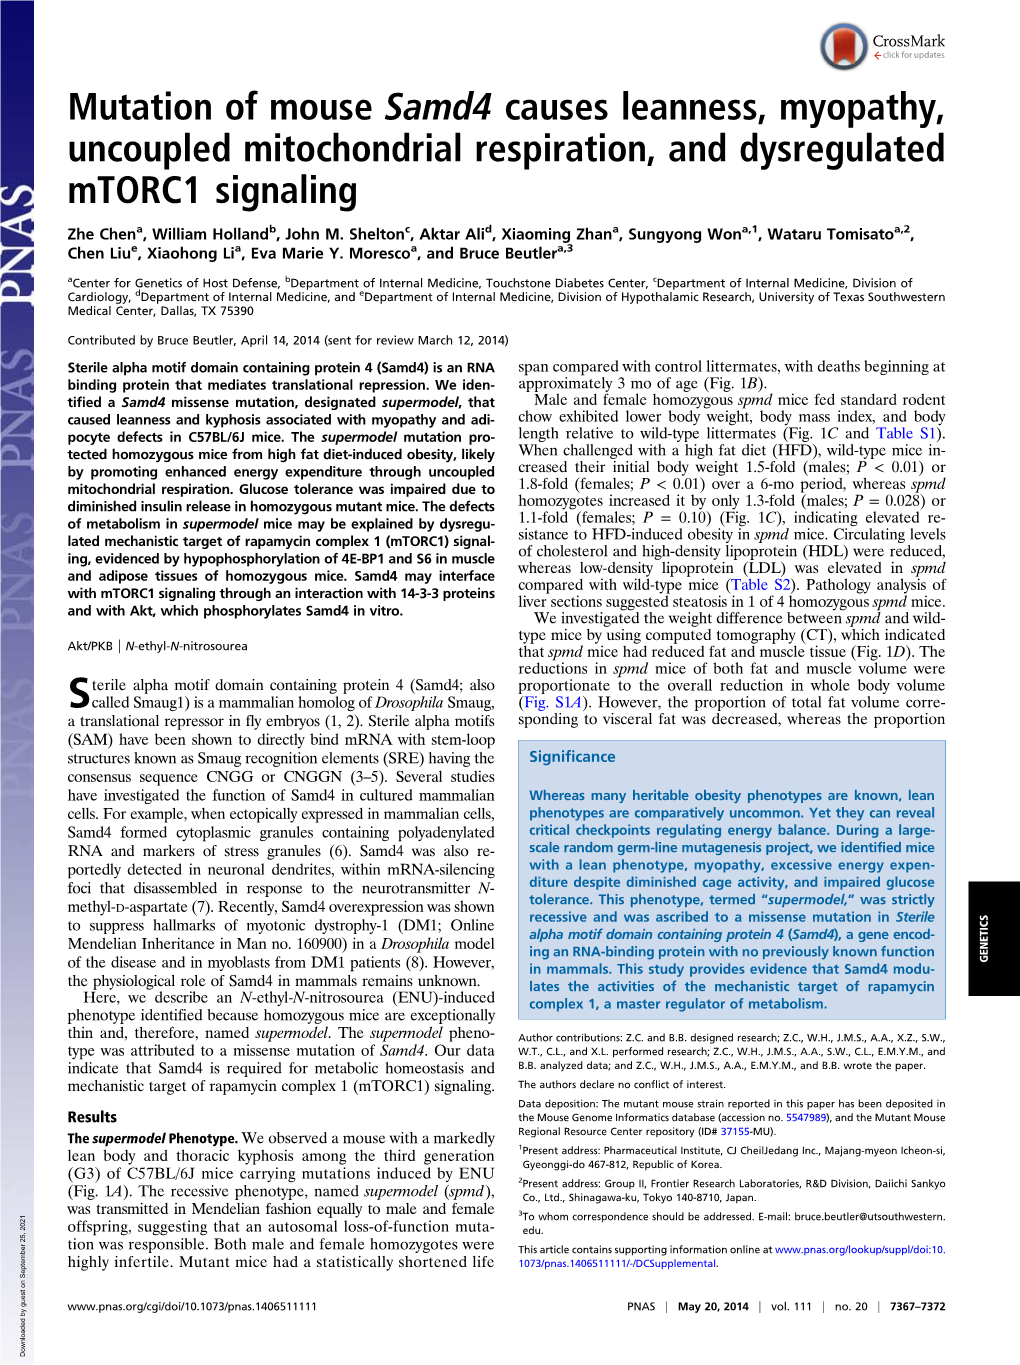 Mutation of Mouse Samd4 Causes Leanness, Myopathy, Uncoupled Mitochondrial Respiration, and Dysregulated Mtorc1 Signaling